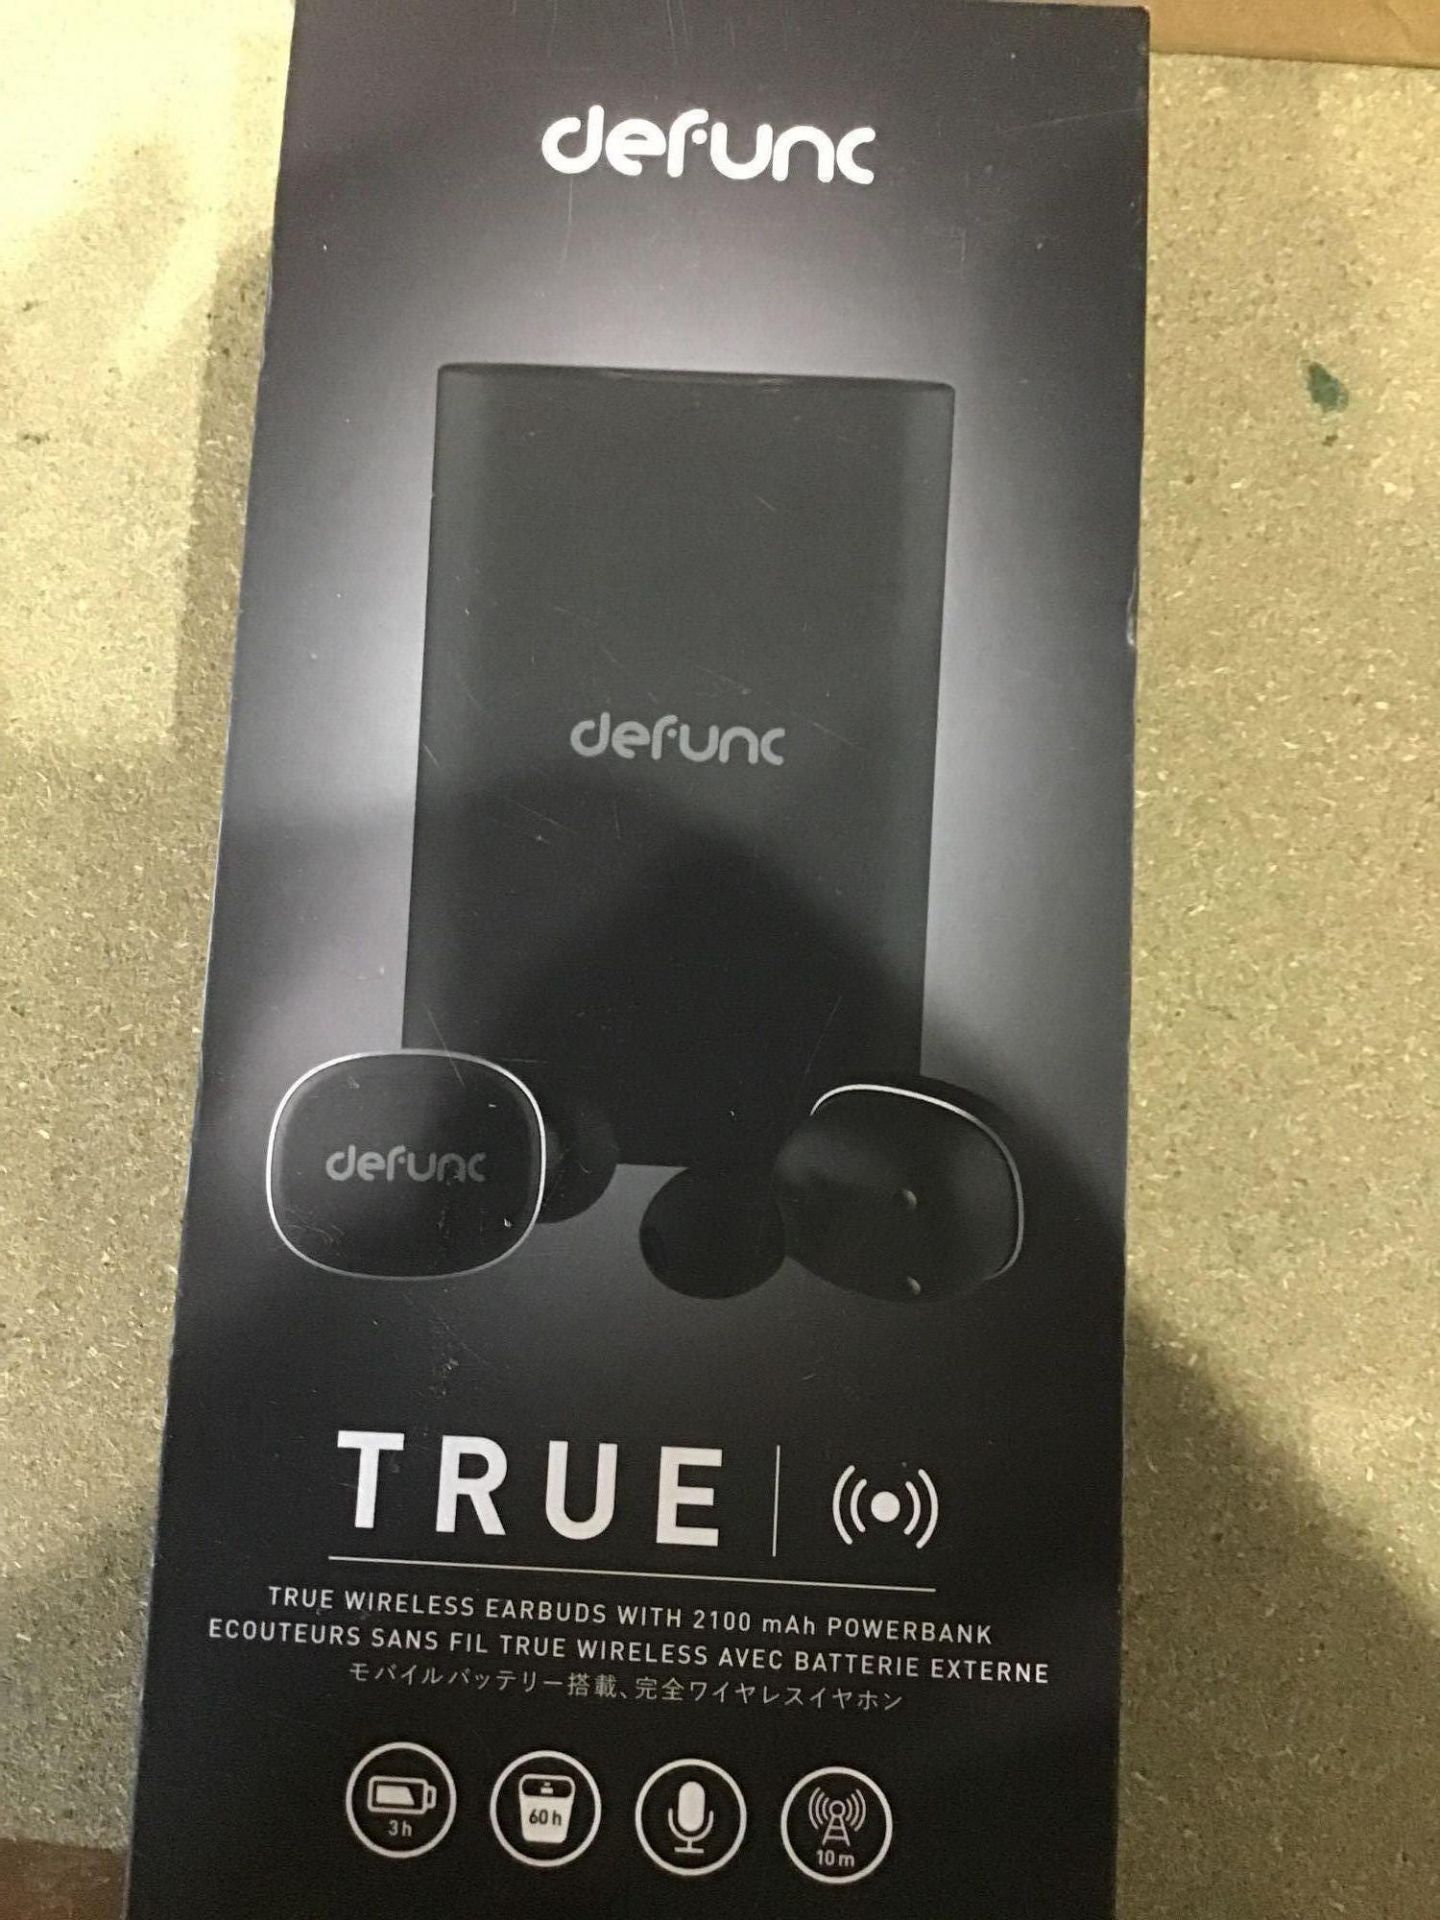 Defunc True Wireless Bluetooth Headphones with 60 Hours Playtime/Talk time $68.87 RRP - Image 2 of 5